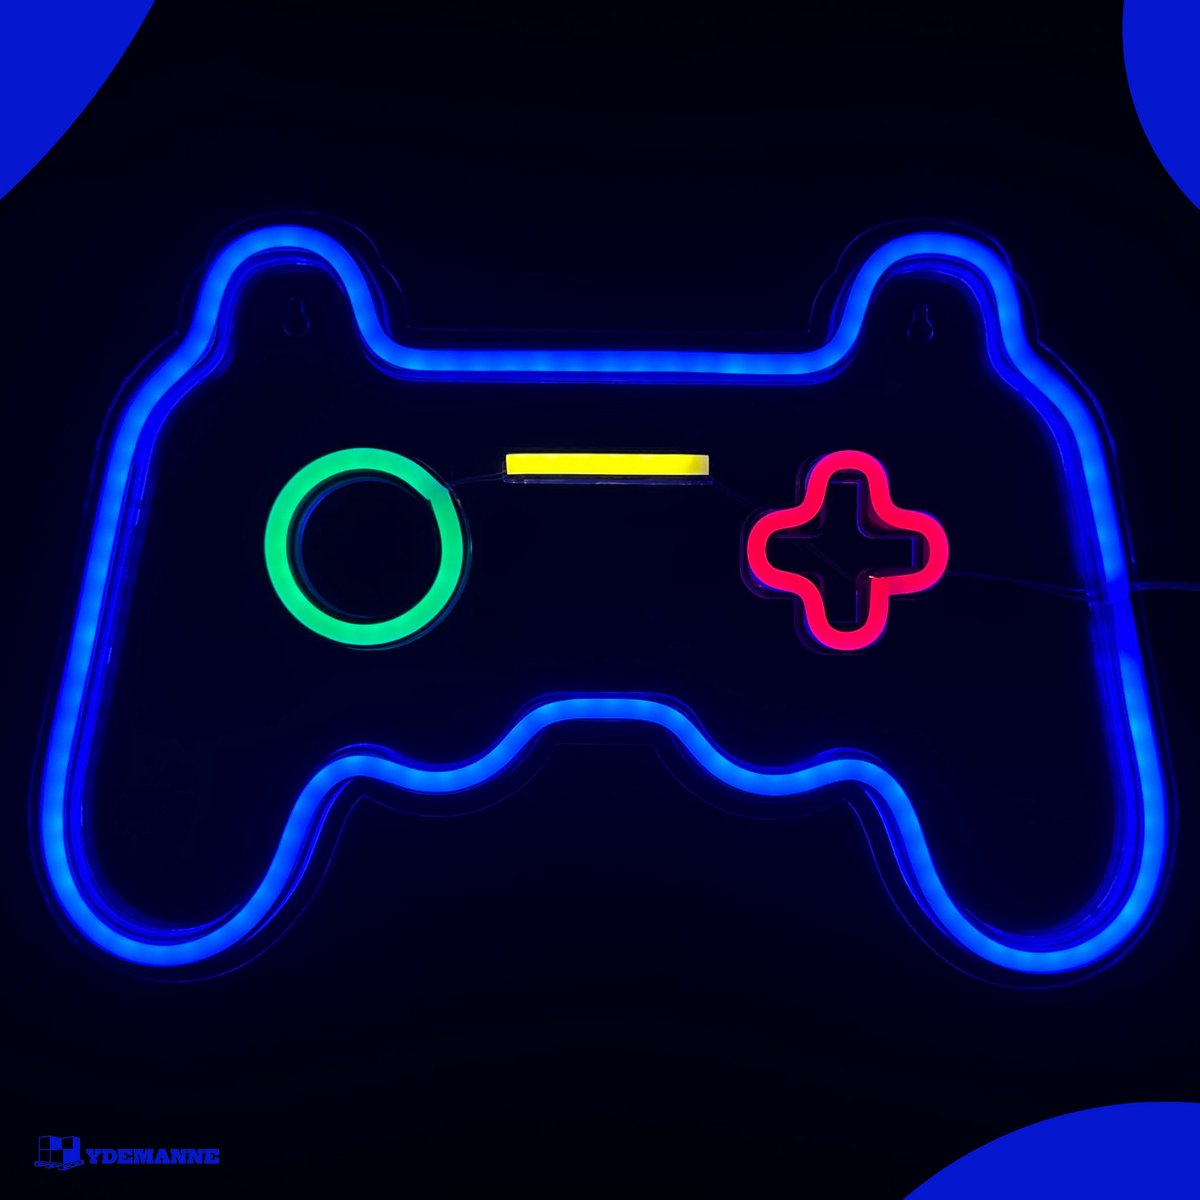 Neon Lamp - Game Controller Blauw Playstation - Incl. Ophanghaakjes - Neon Sign - Neon Verlichting - Neon Led Lamp - Wandlamp - Mancave